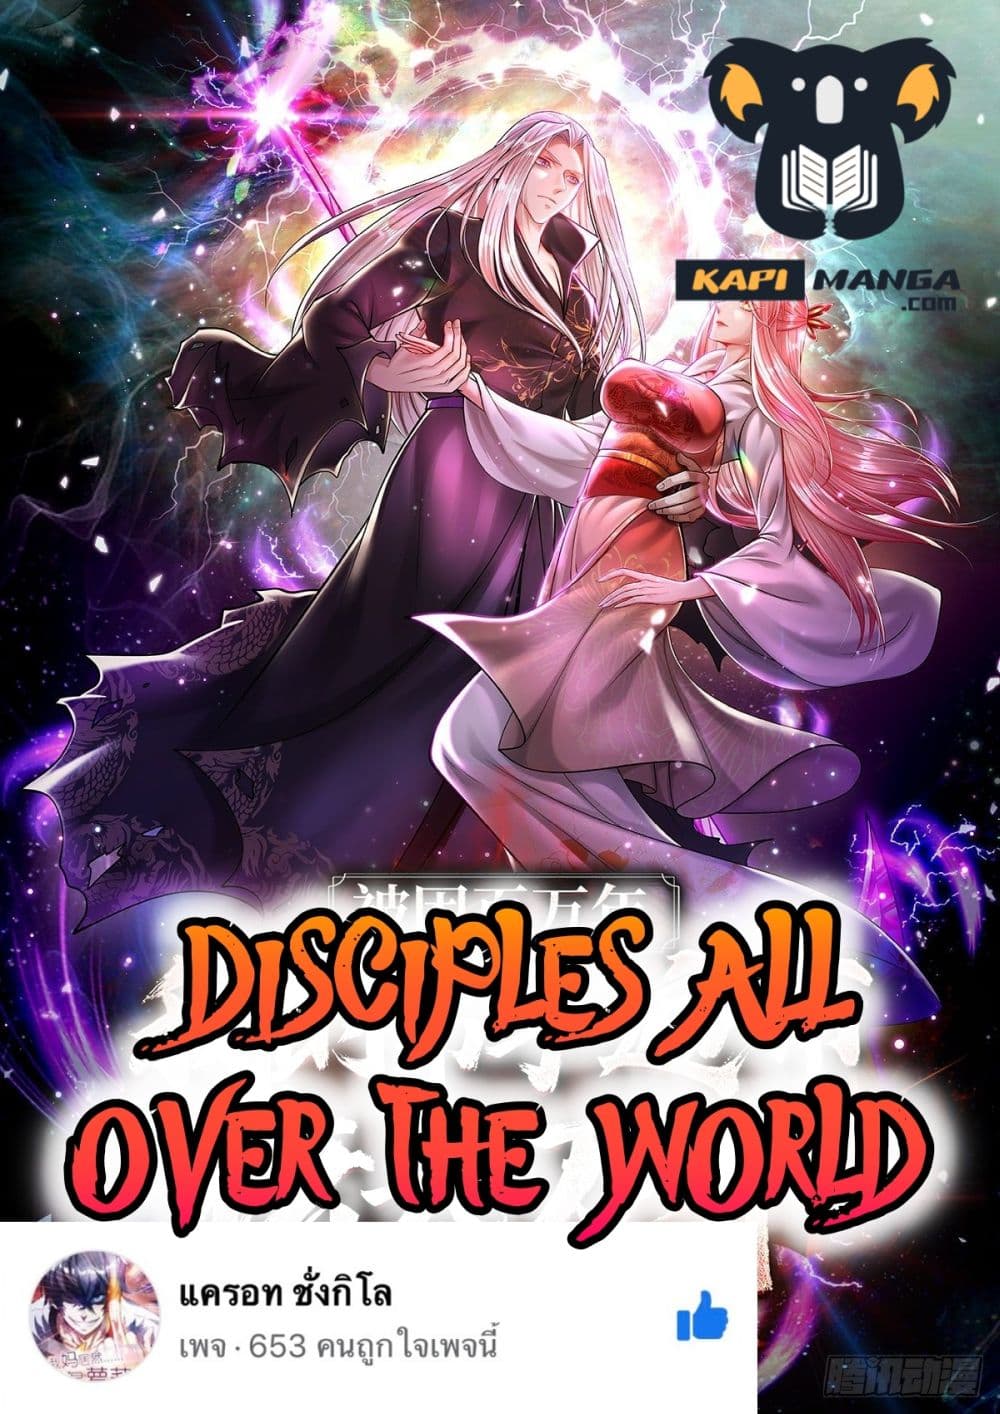 Disciples All Over the World à¸à¸­à¸à¸à¸µà¹ 74 (1)